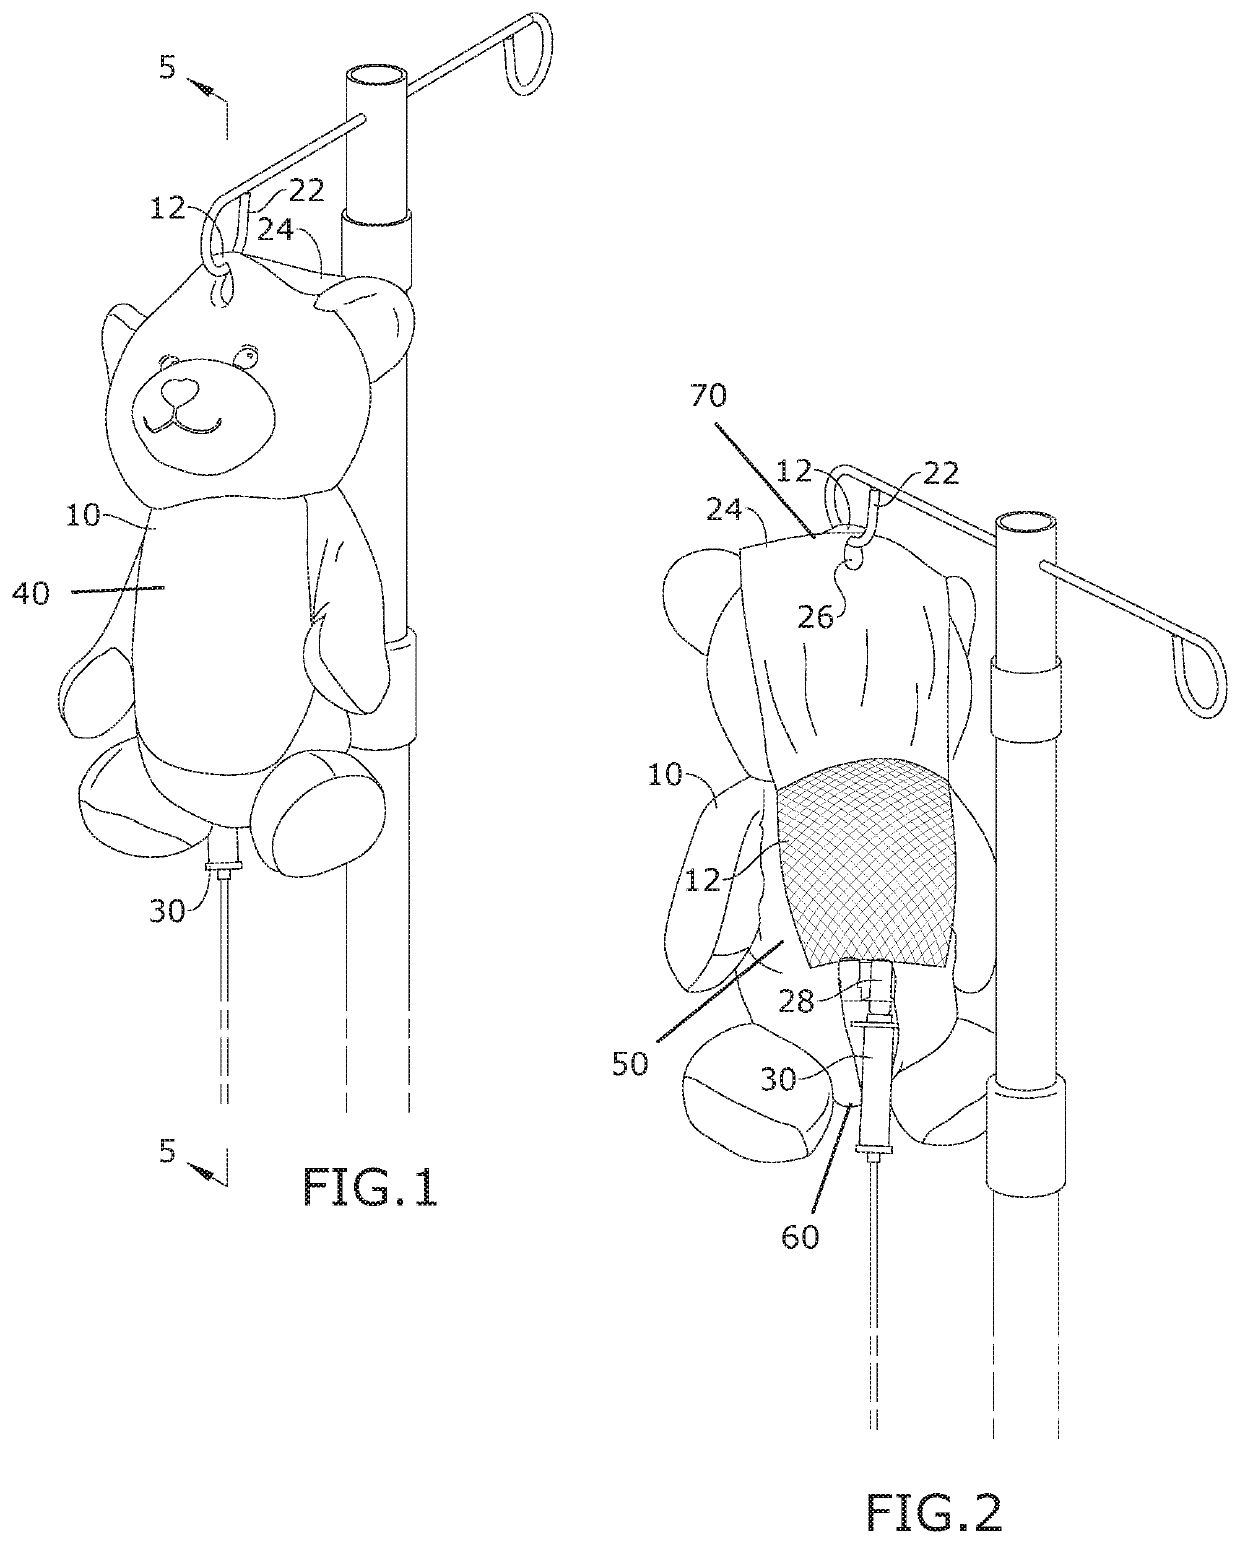 Therapeutic pouch for concealing intravenous therapy equipment